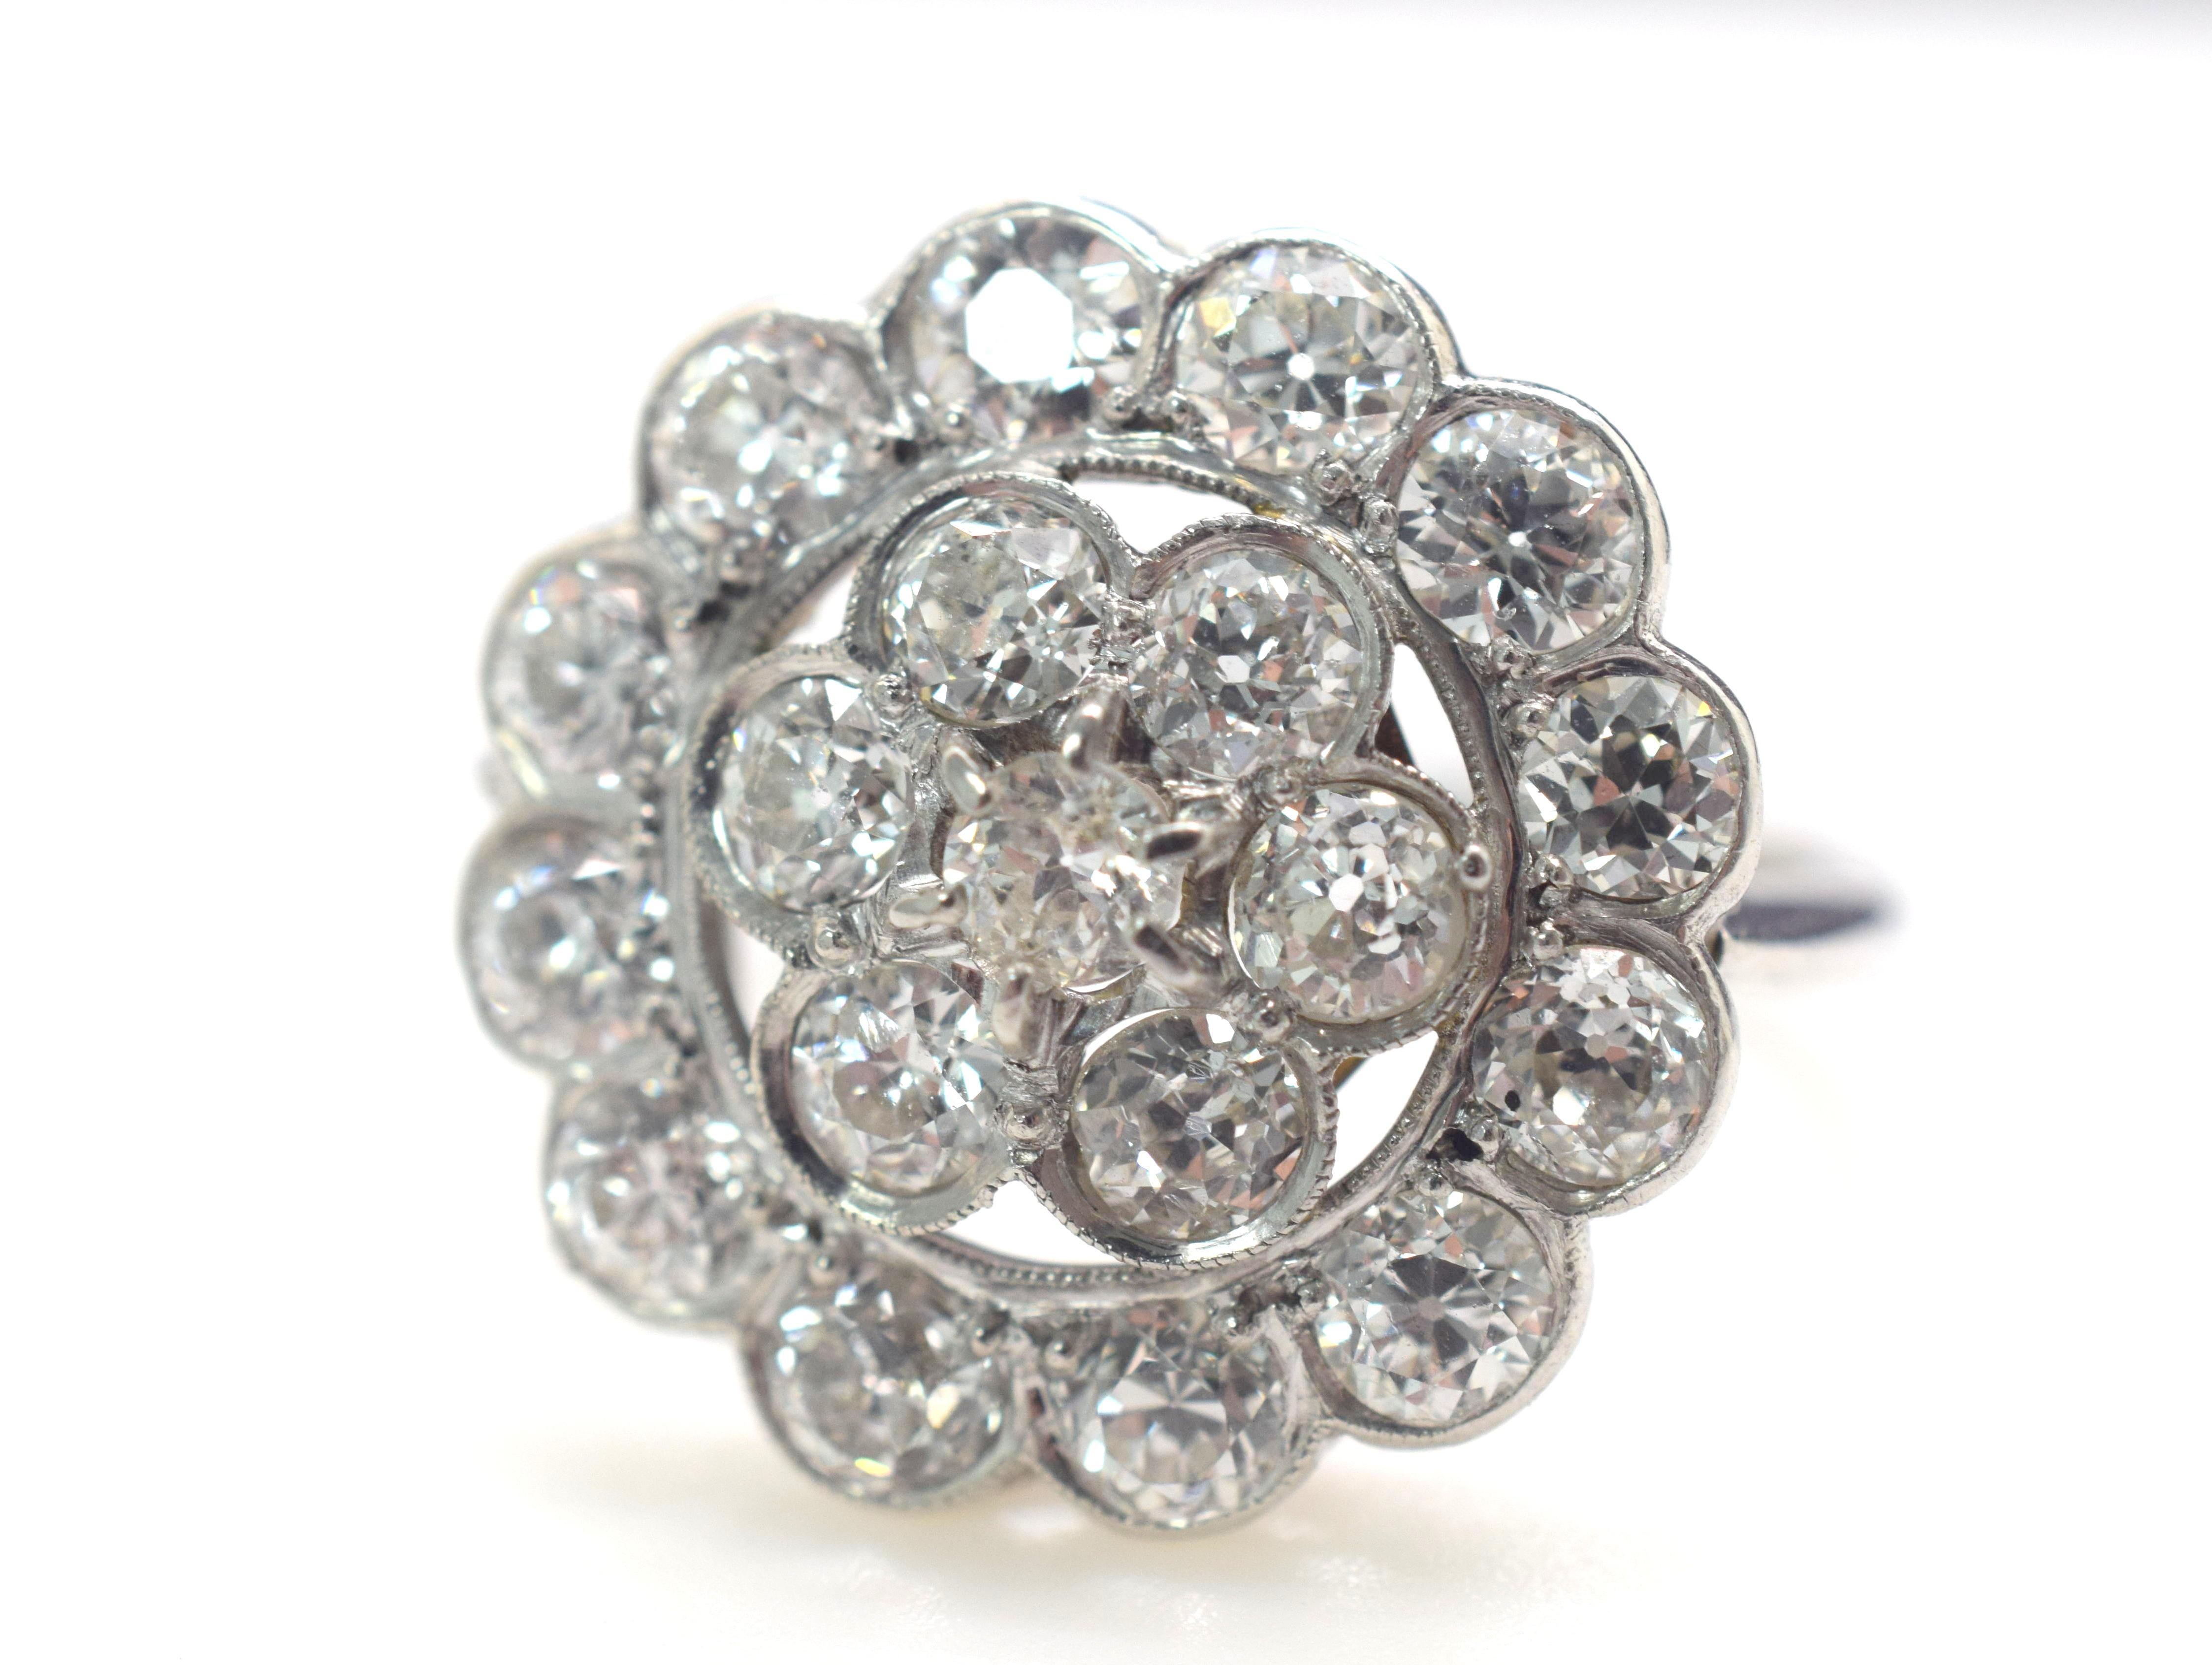 Gorgeous vintage ring for her. This Diamond Cluster ring is crafted in both platinum and 18k white gold. The head of the ring with the Diamonds is set in platinum and the shank is 18k. A total of 3.00 Tcw is set into this ring  with Diamonds